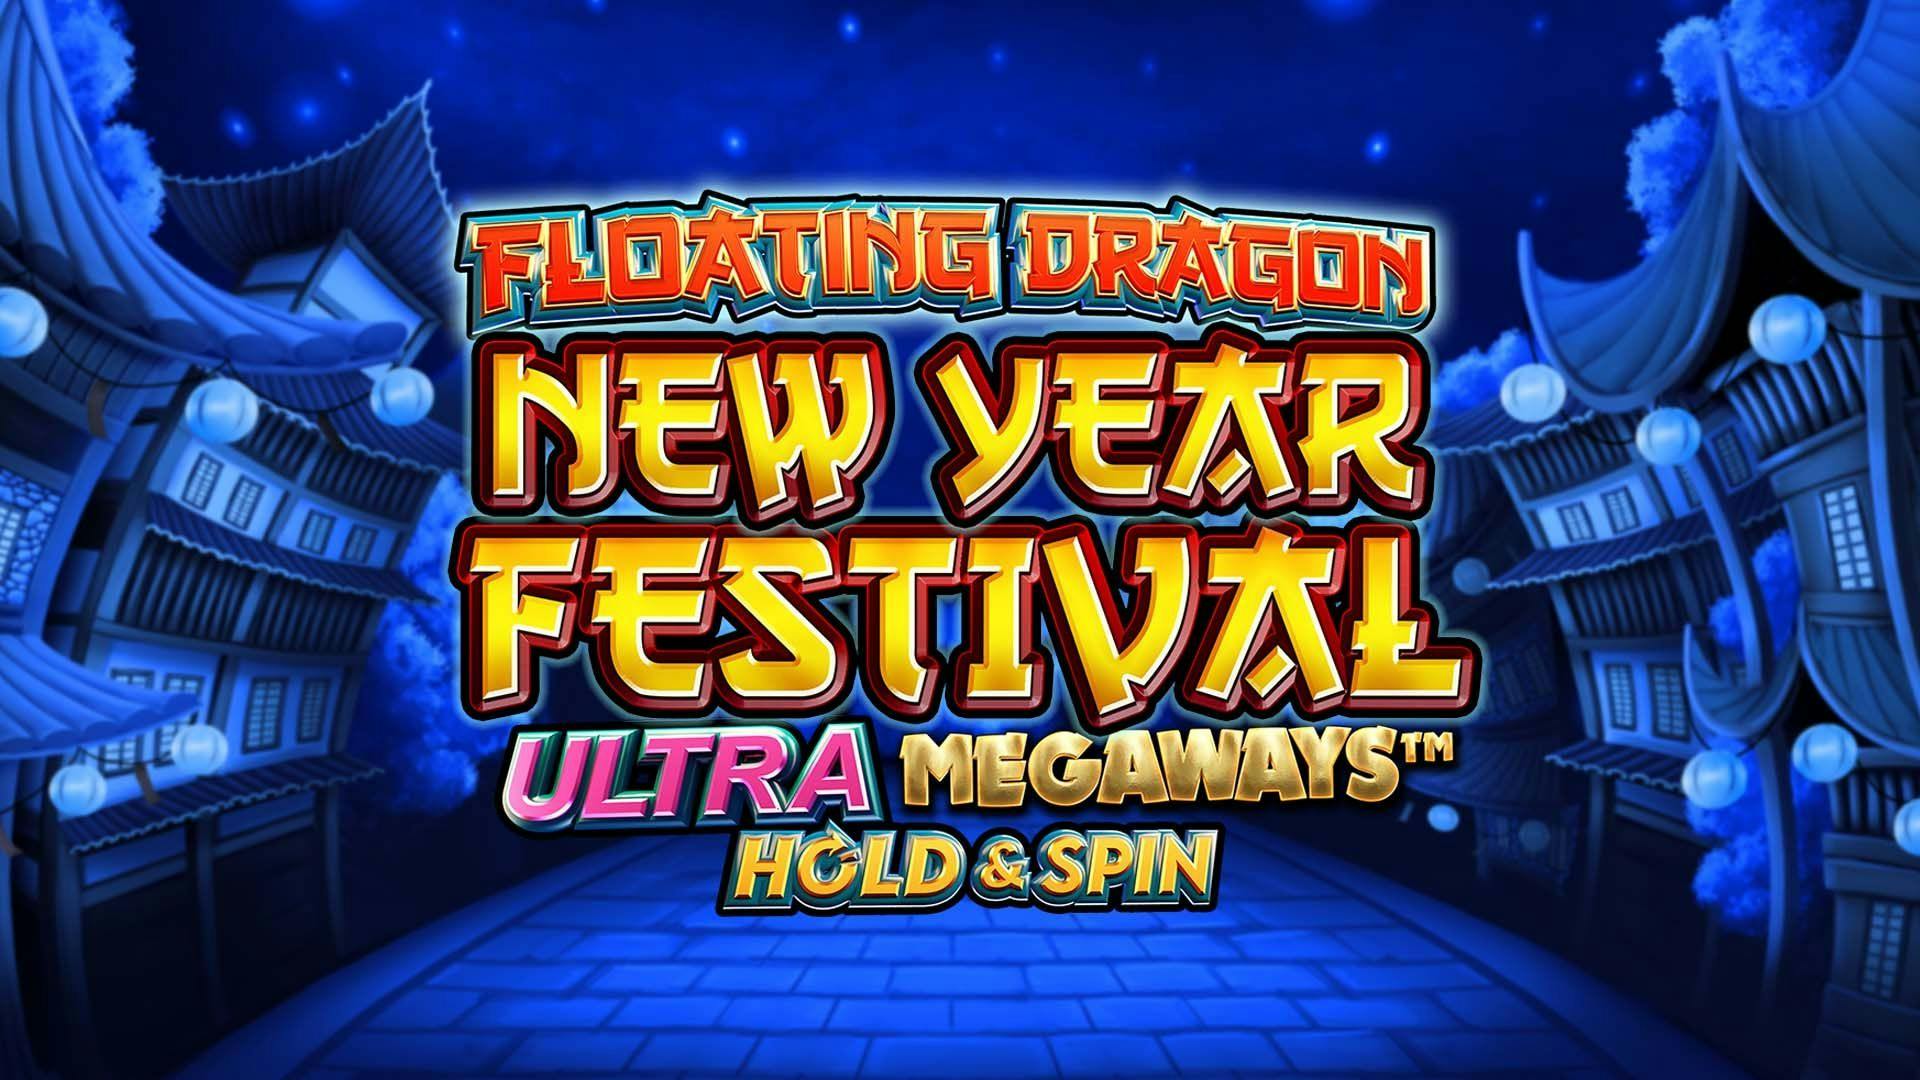 Floating Dragon New Year Festival Ultra Megaways Hold & Spin Slot Machine Online Free Game Play